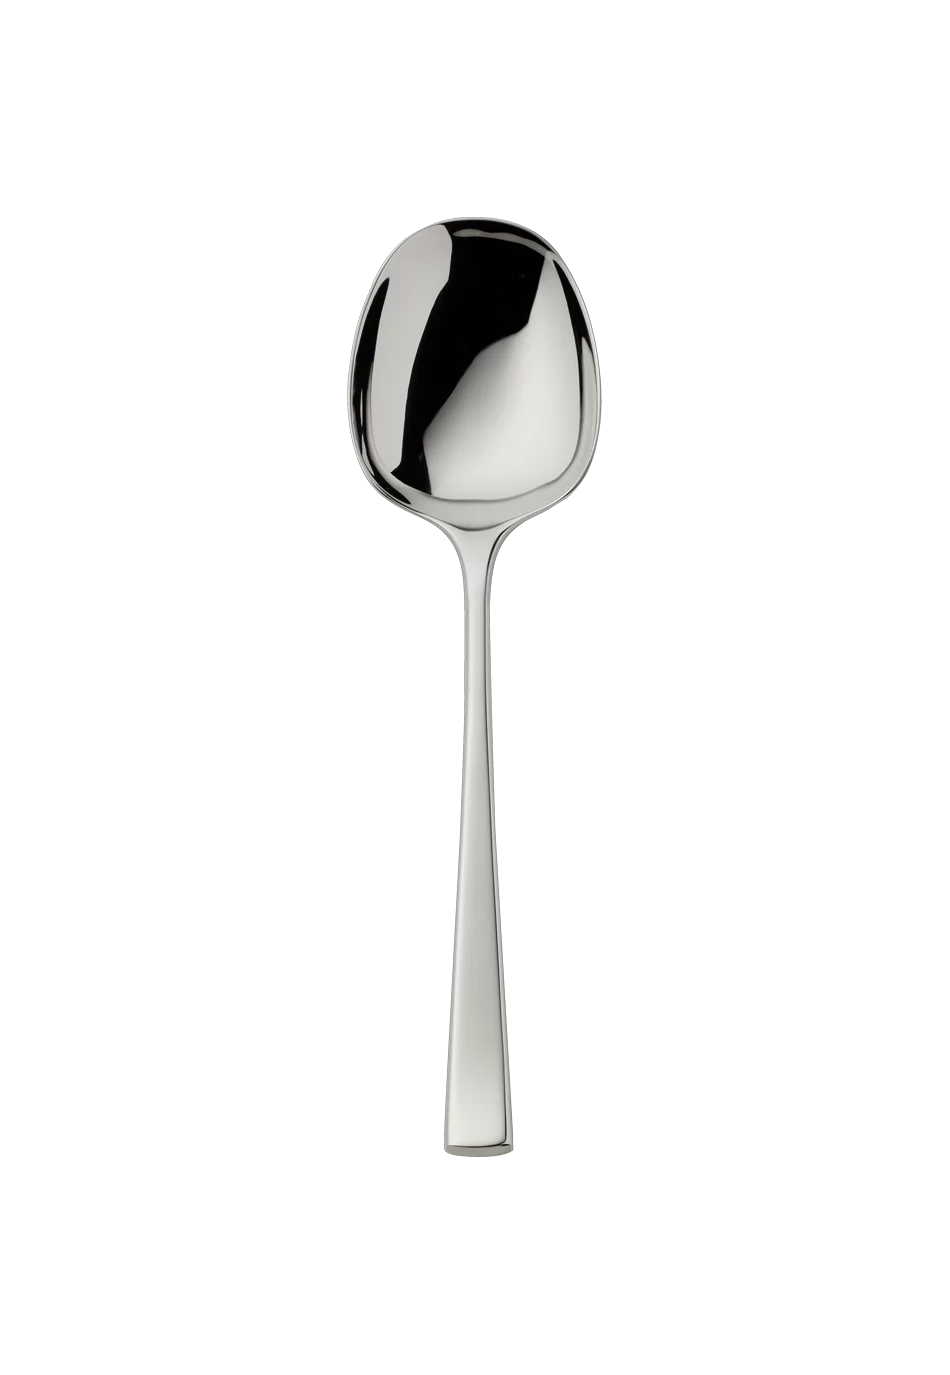 York Compote/Salad Serving Spoon, large (18/8 stainless steel)